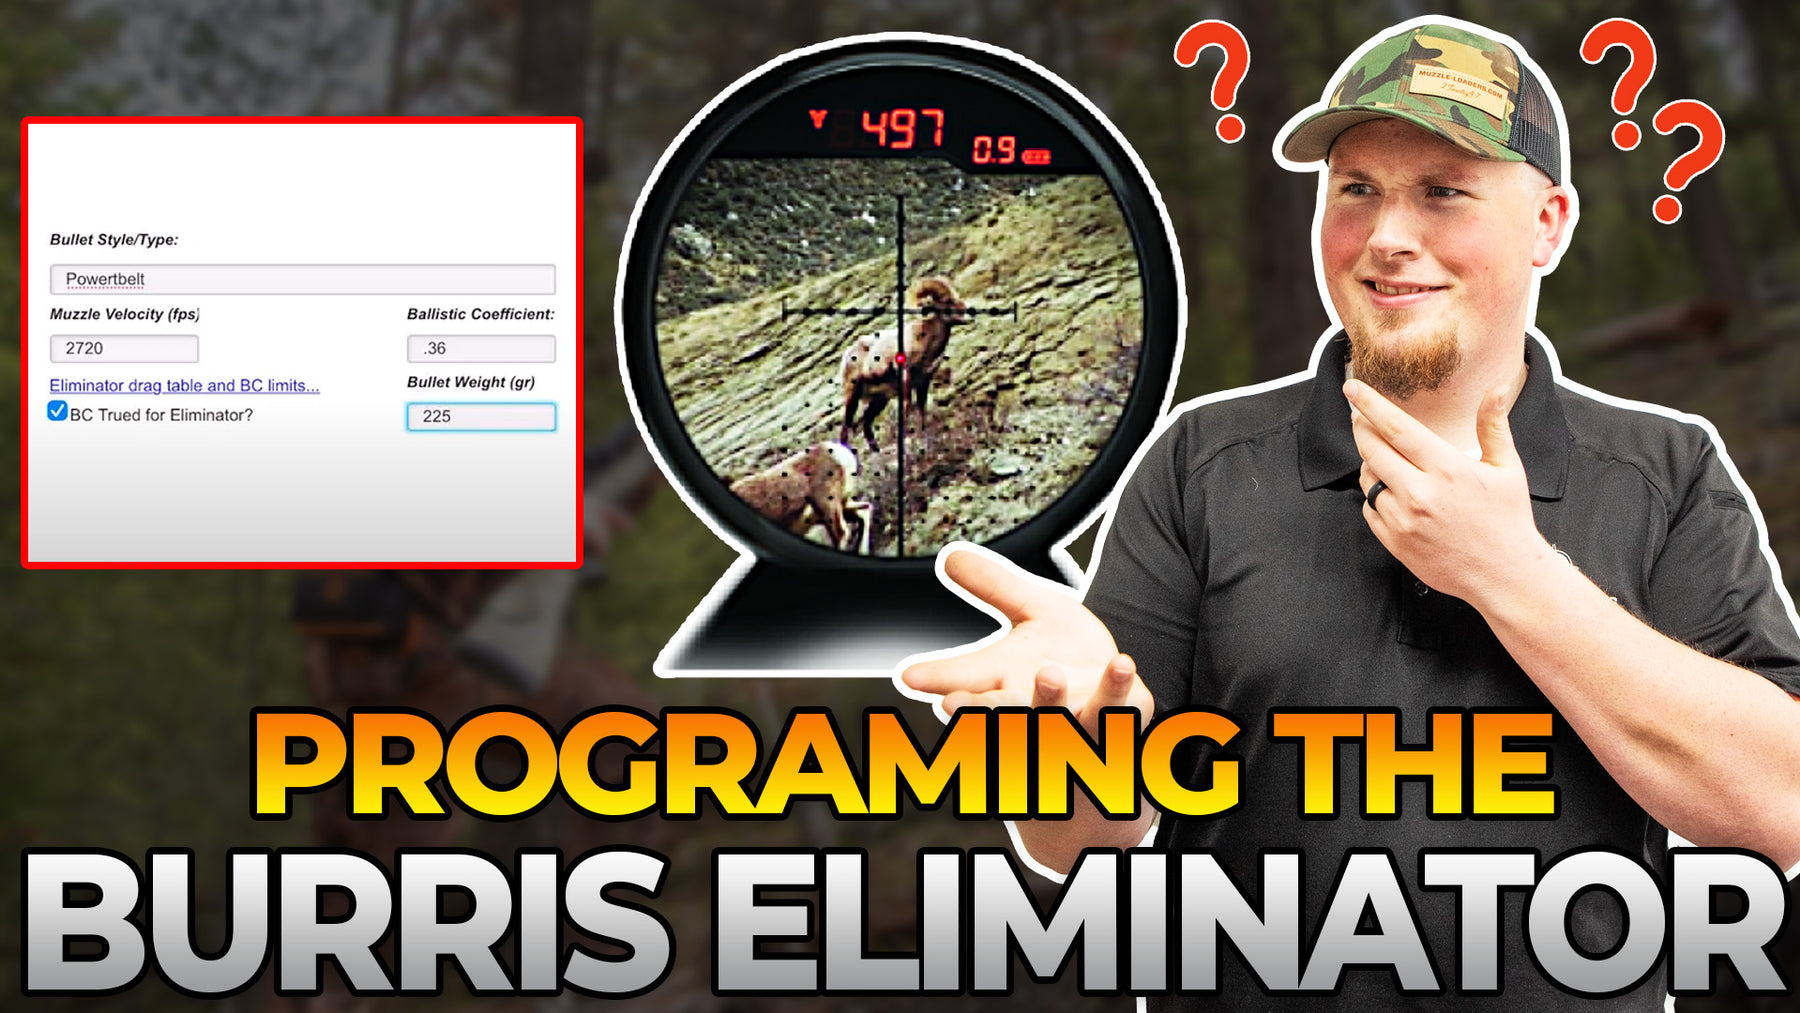 How to Program the Burris Eliminator 4 with a Muzzleloader